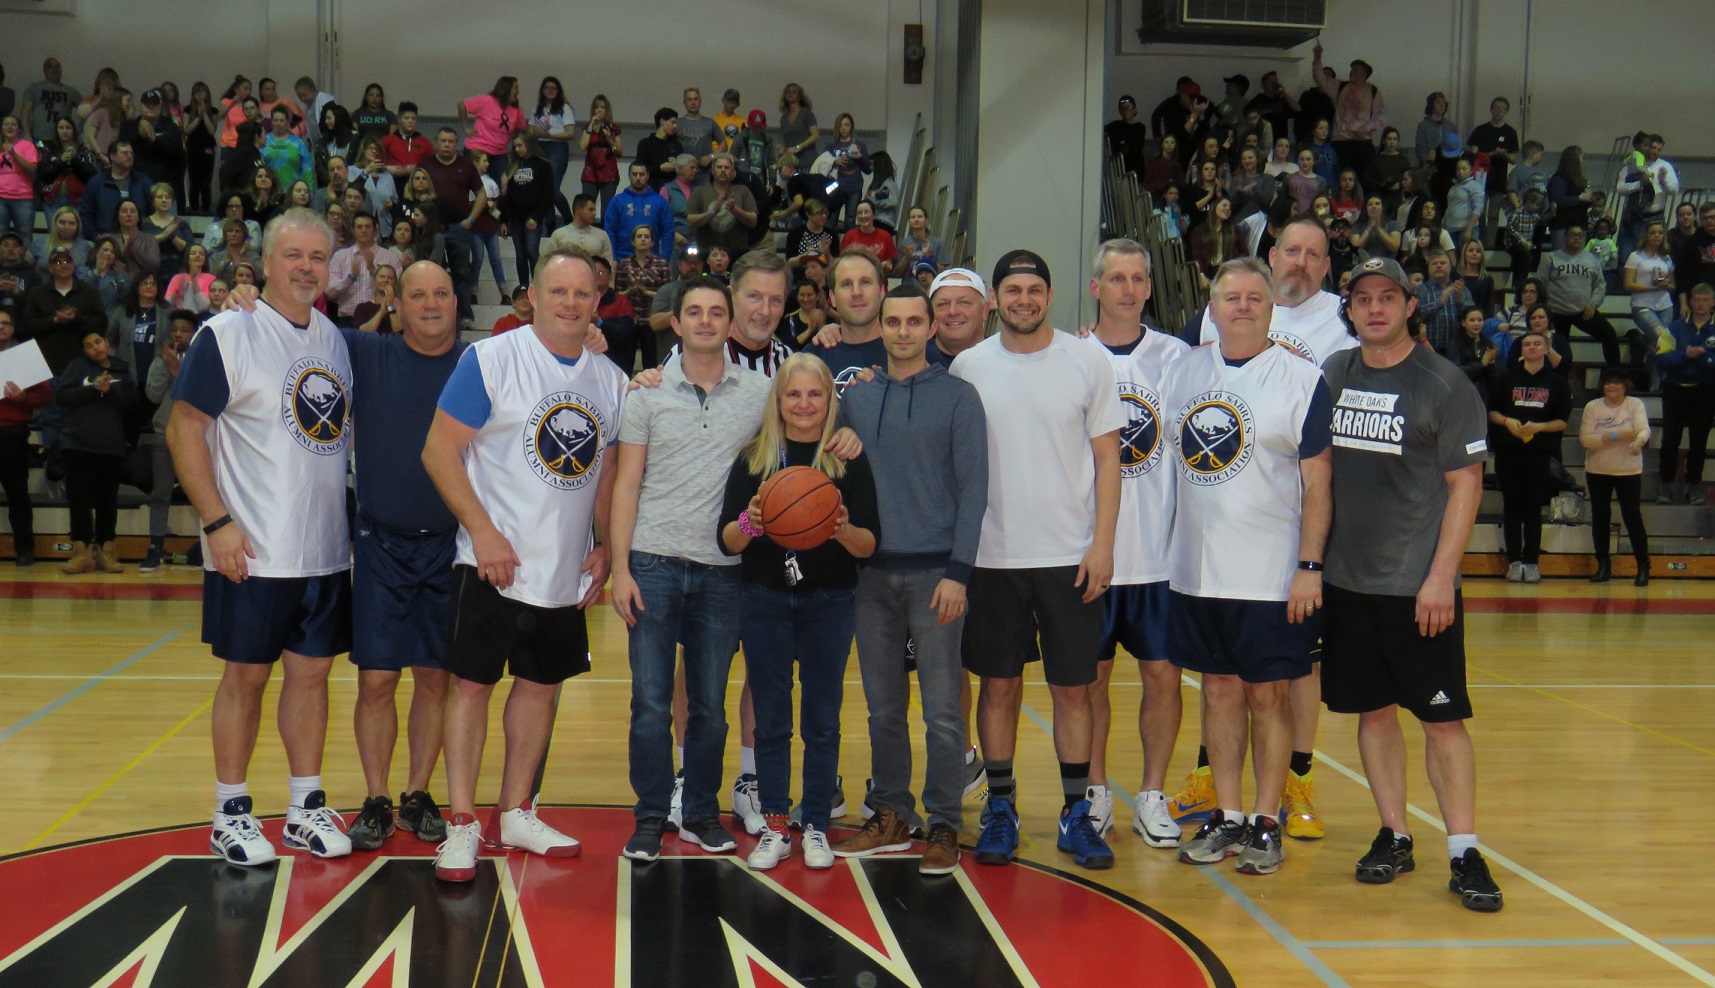 Family of the late James Campbell pose for a picture with the Sabres Alumni. (All photos by David Yarger)